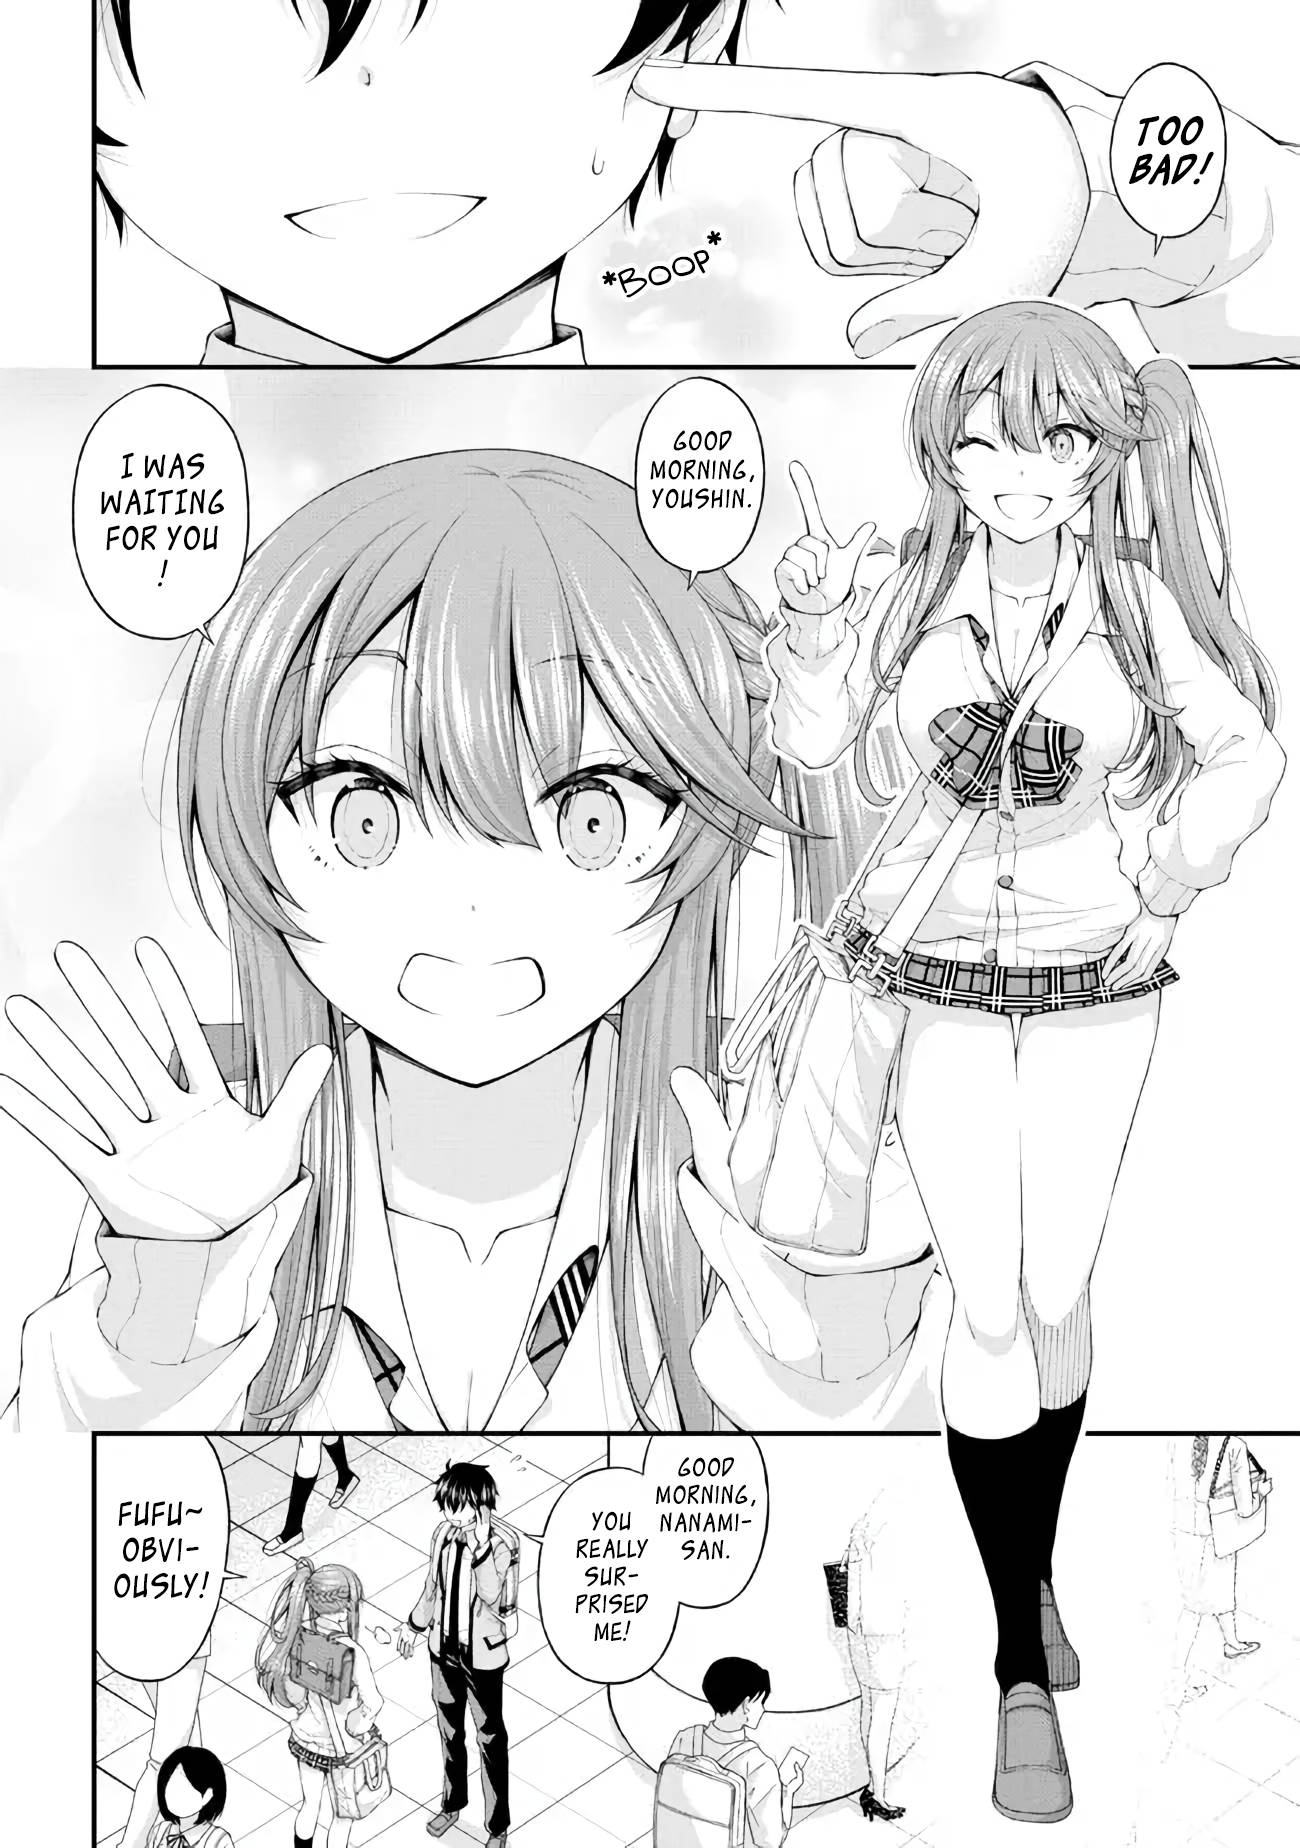 The Gal Who Was Meant to Confess to Me as a Game Punishment - chapter 5 - #2